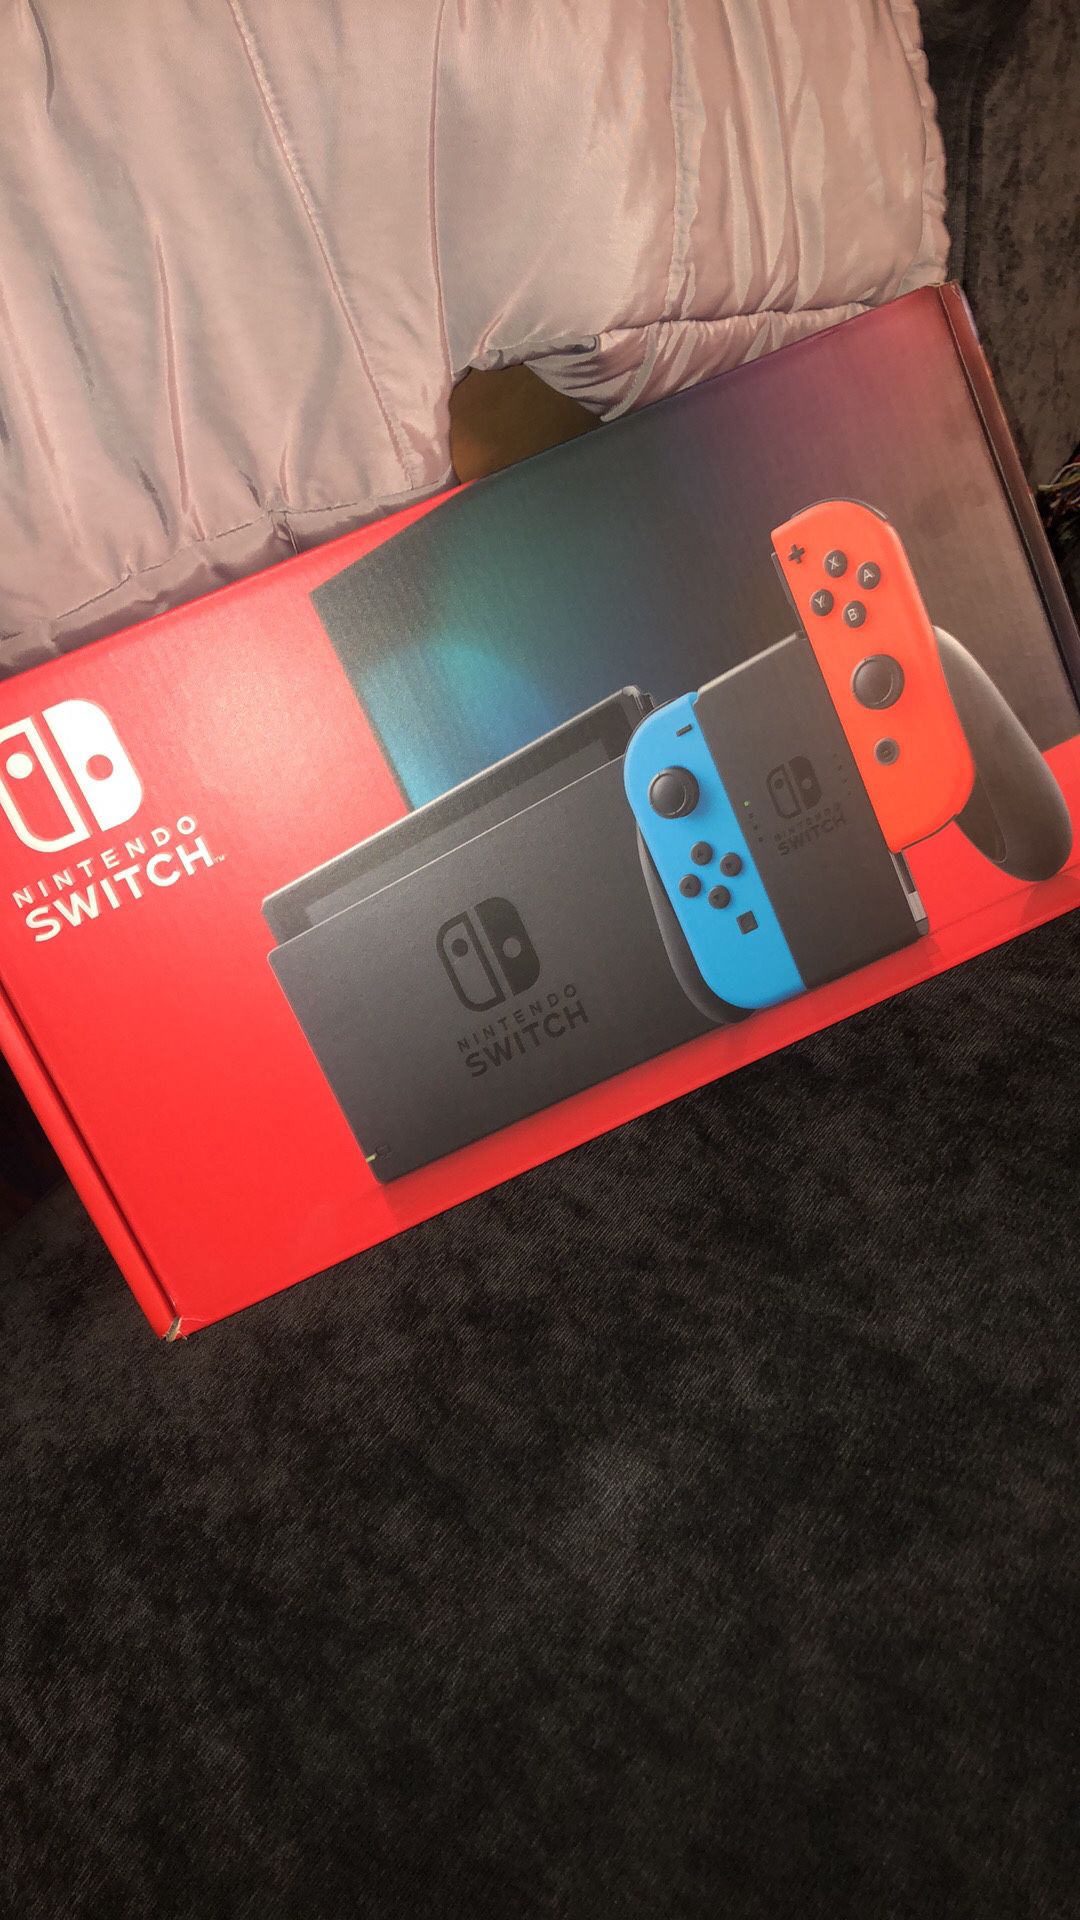 BRAND NEW Nintendo Switch (V2) Neon red and blue